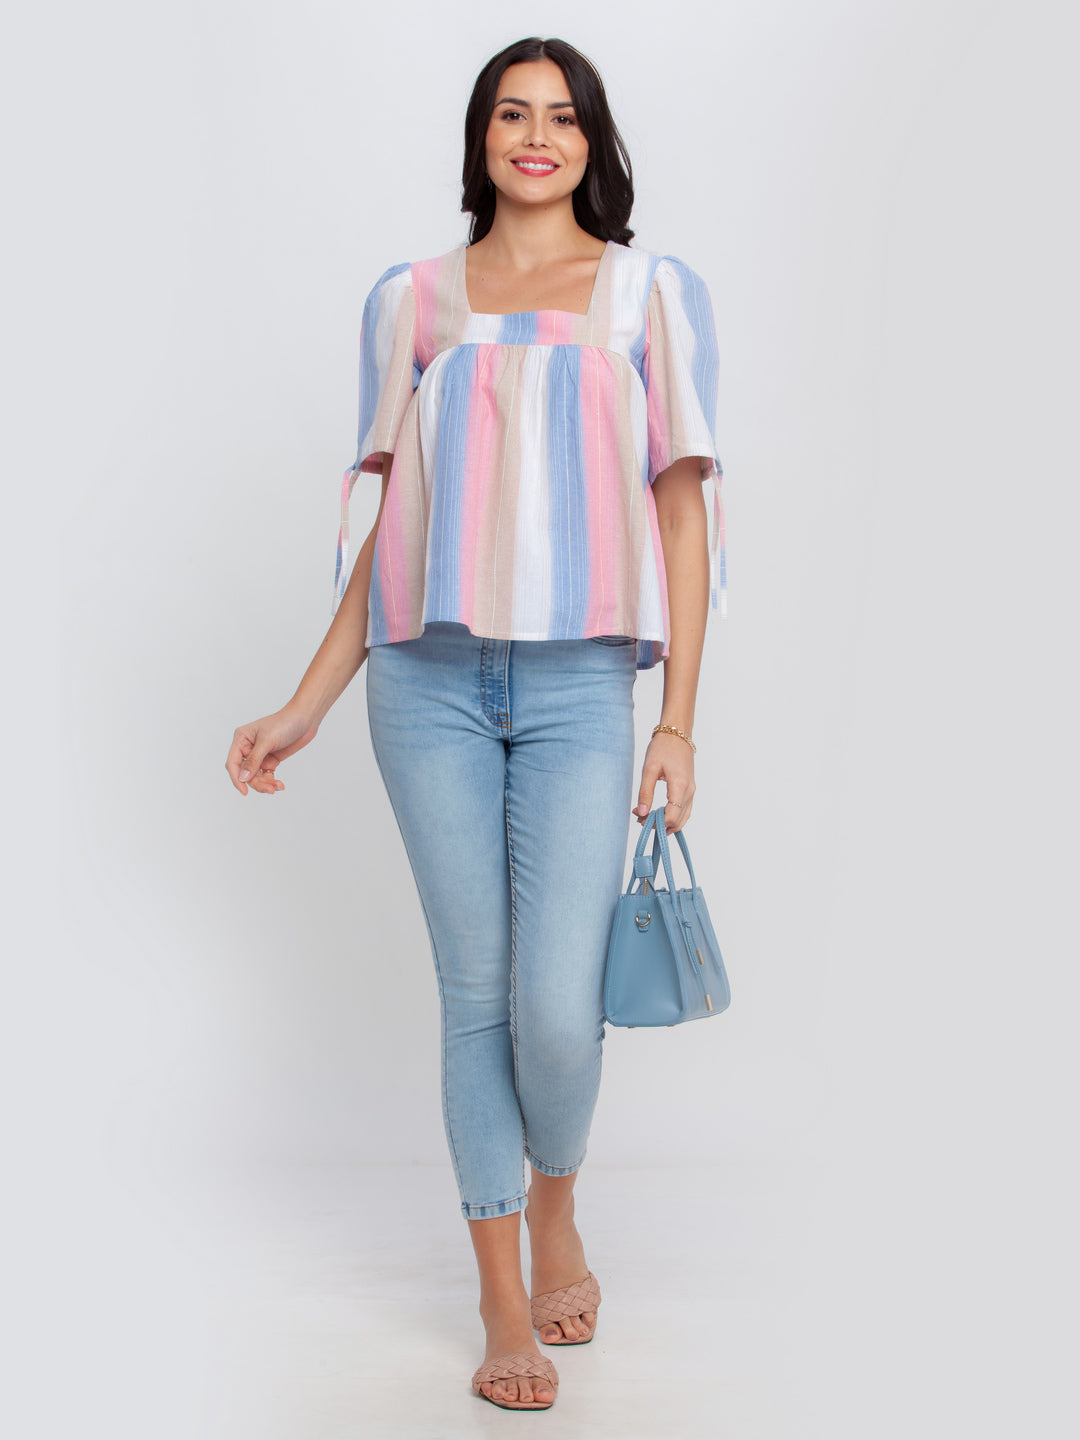 Multicolored Printed Top For Women